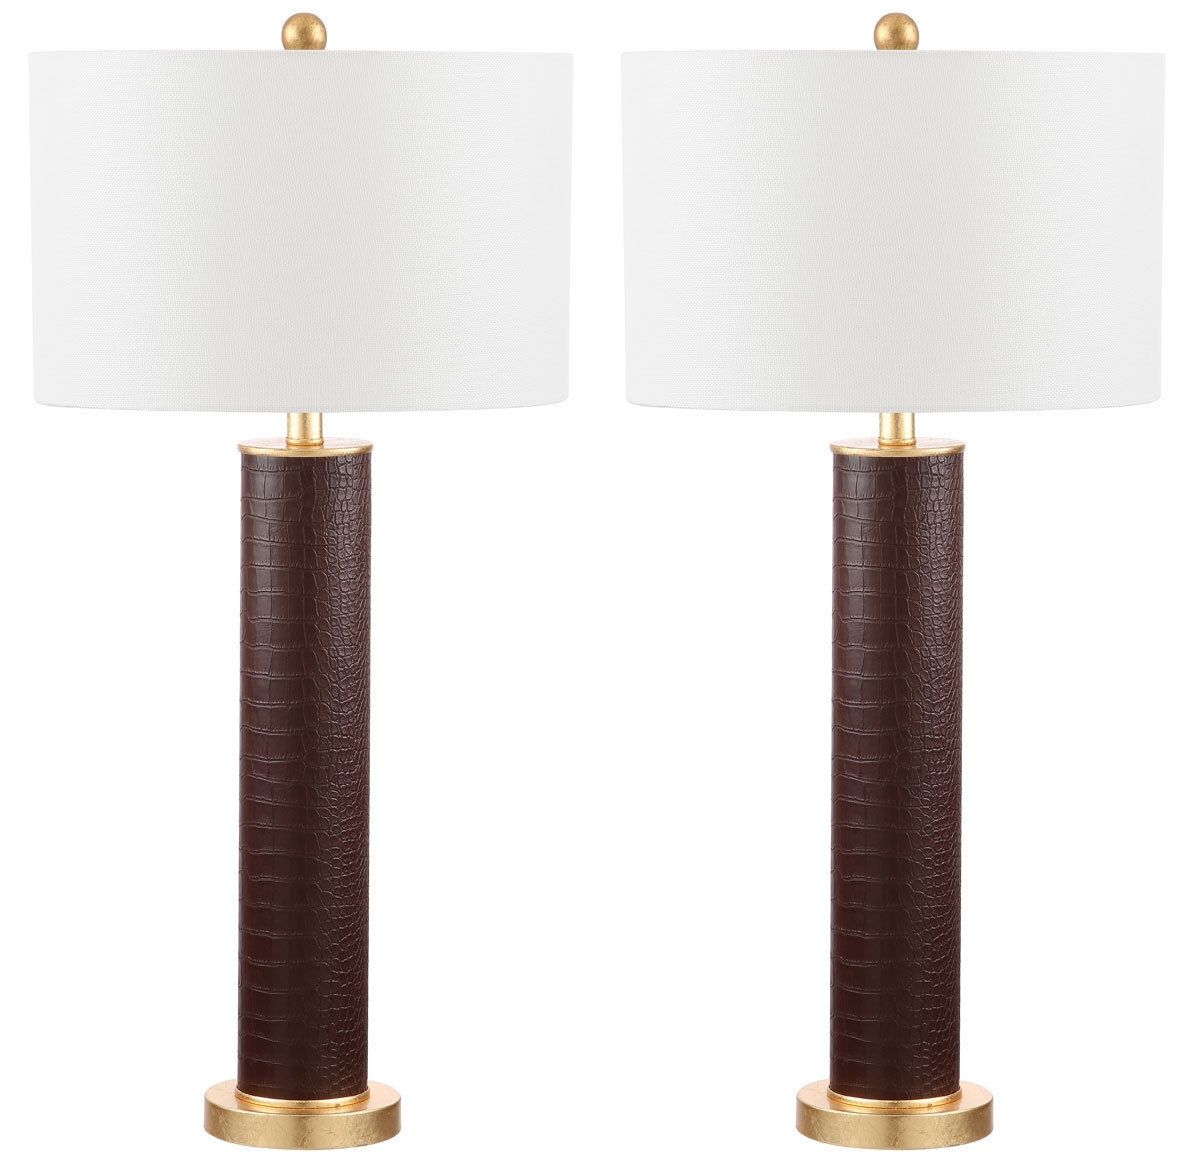 Ollie 31.5-Inch H Faux Alligator Table Lamp - Brown - Arlo Home - Image 2